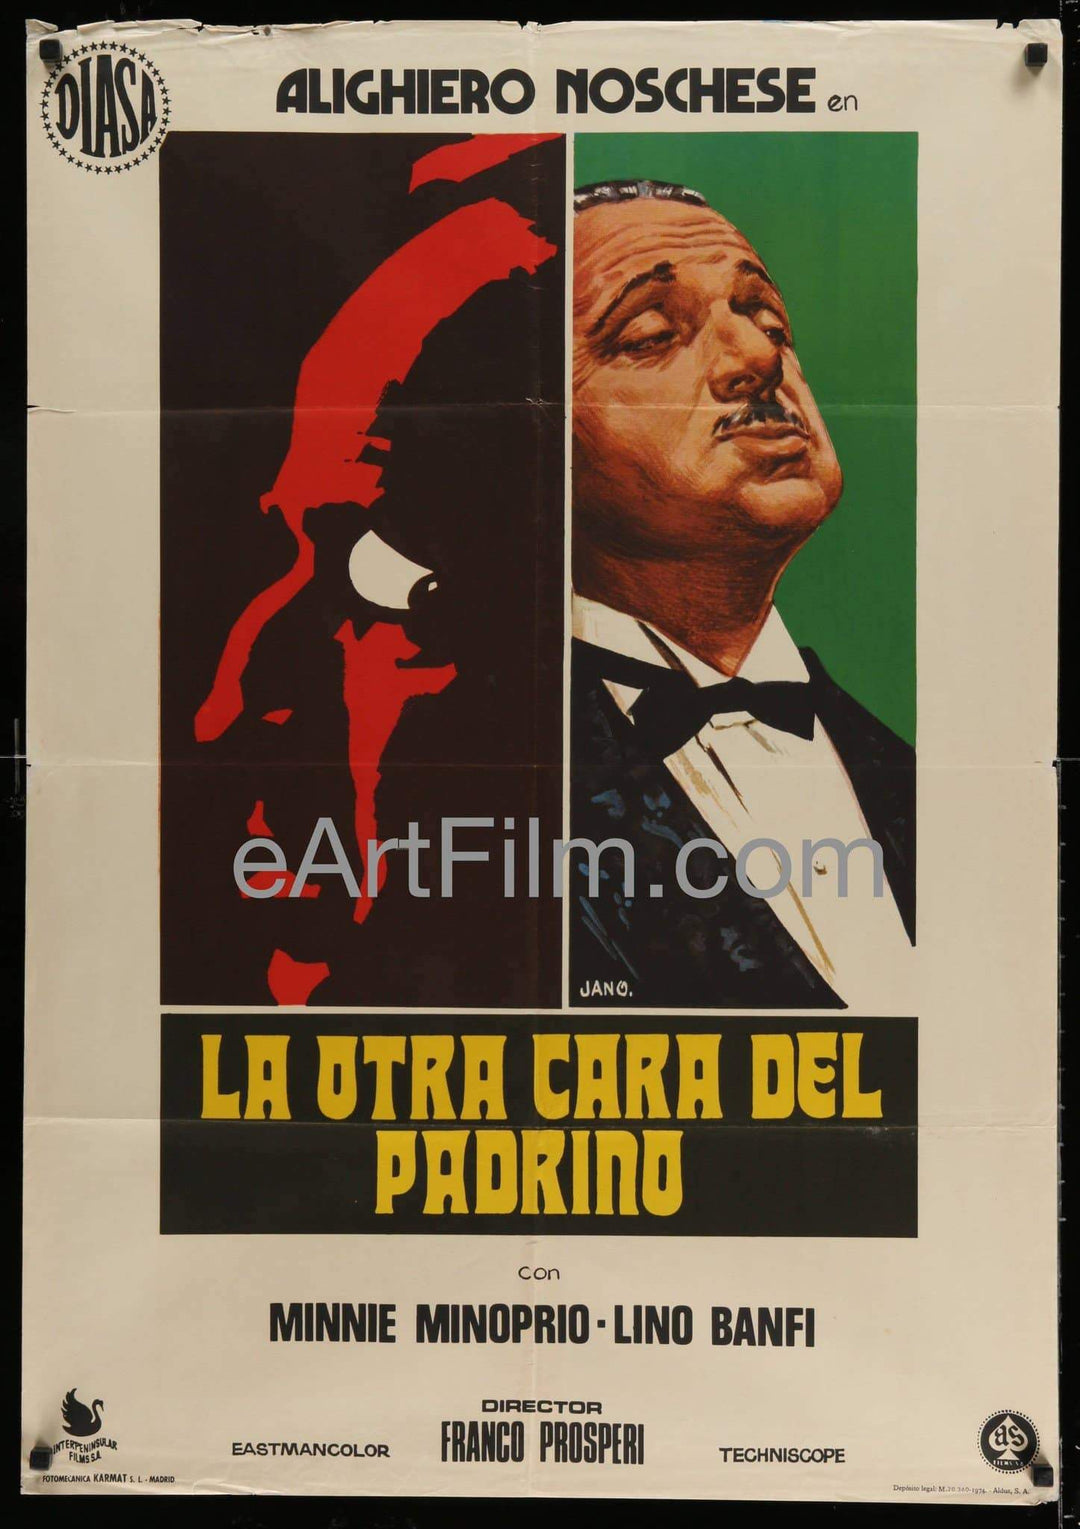 eArtFilm.com Spain (27"x39.5") Funny Face Of The Godfather 1973 27X39 Spanish Movie Poster Godfather spoof